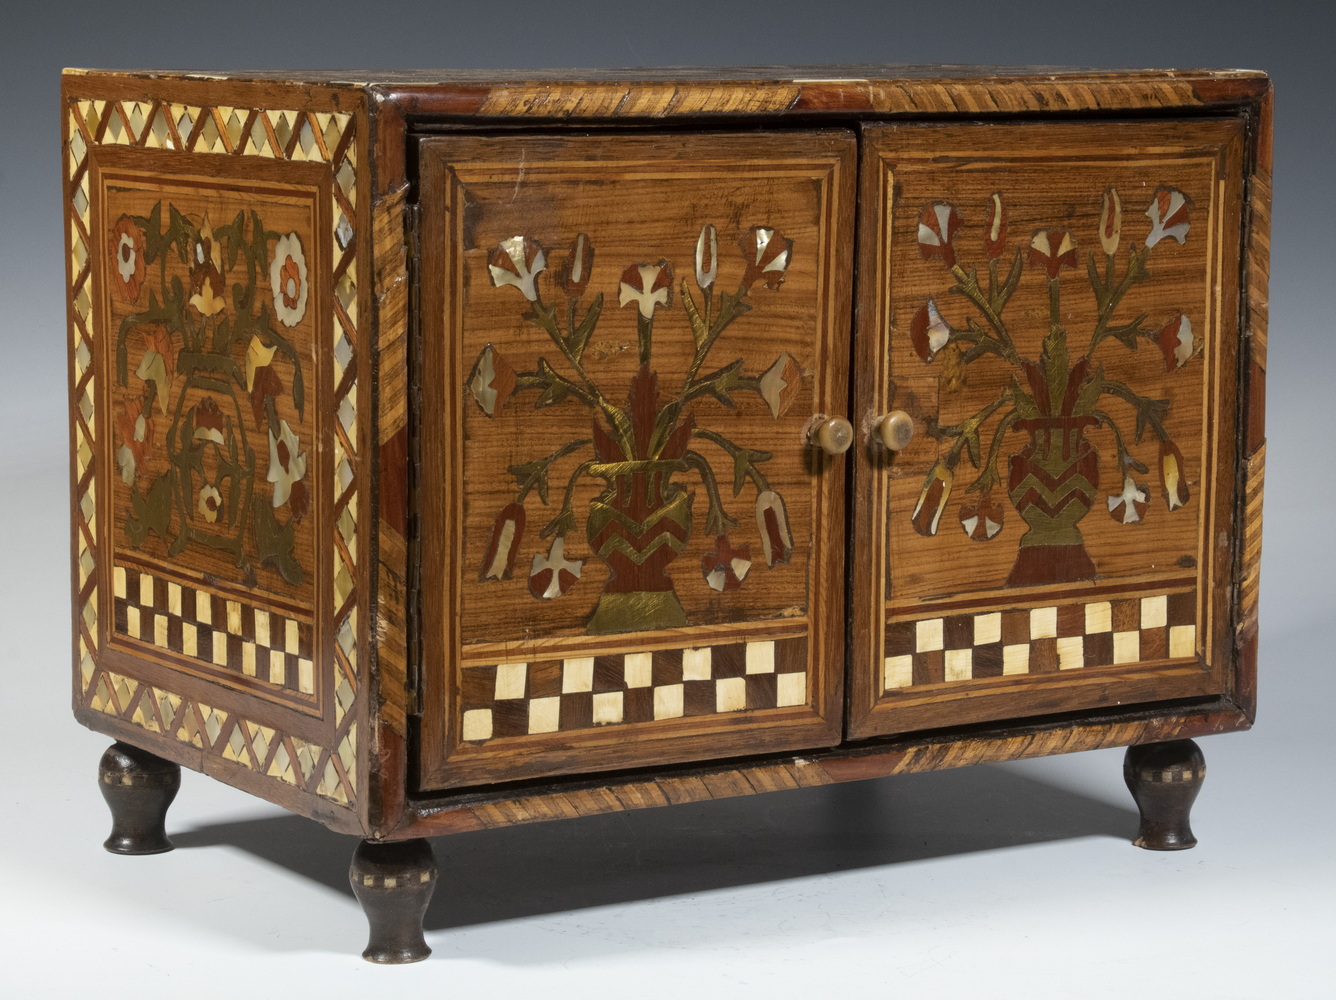 INLAID INDO-DUTCH STYLE SPICE CABINET